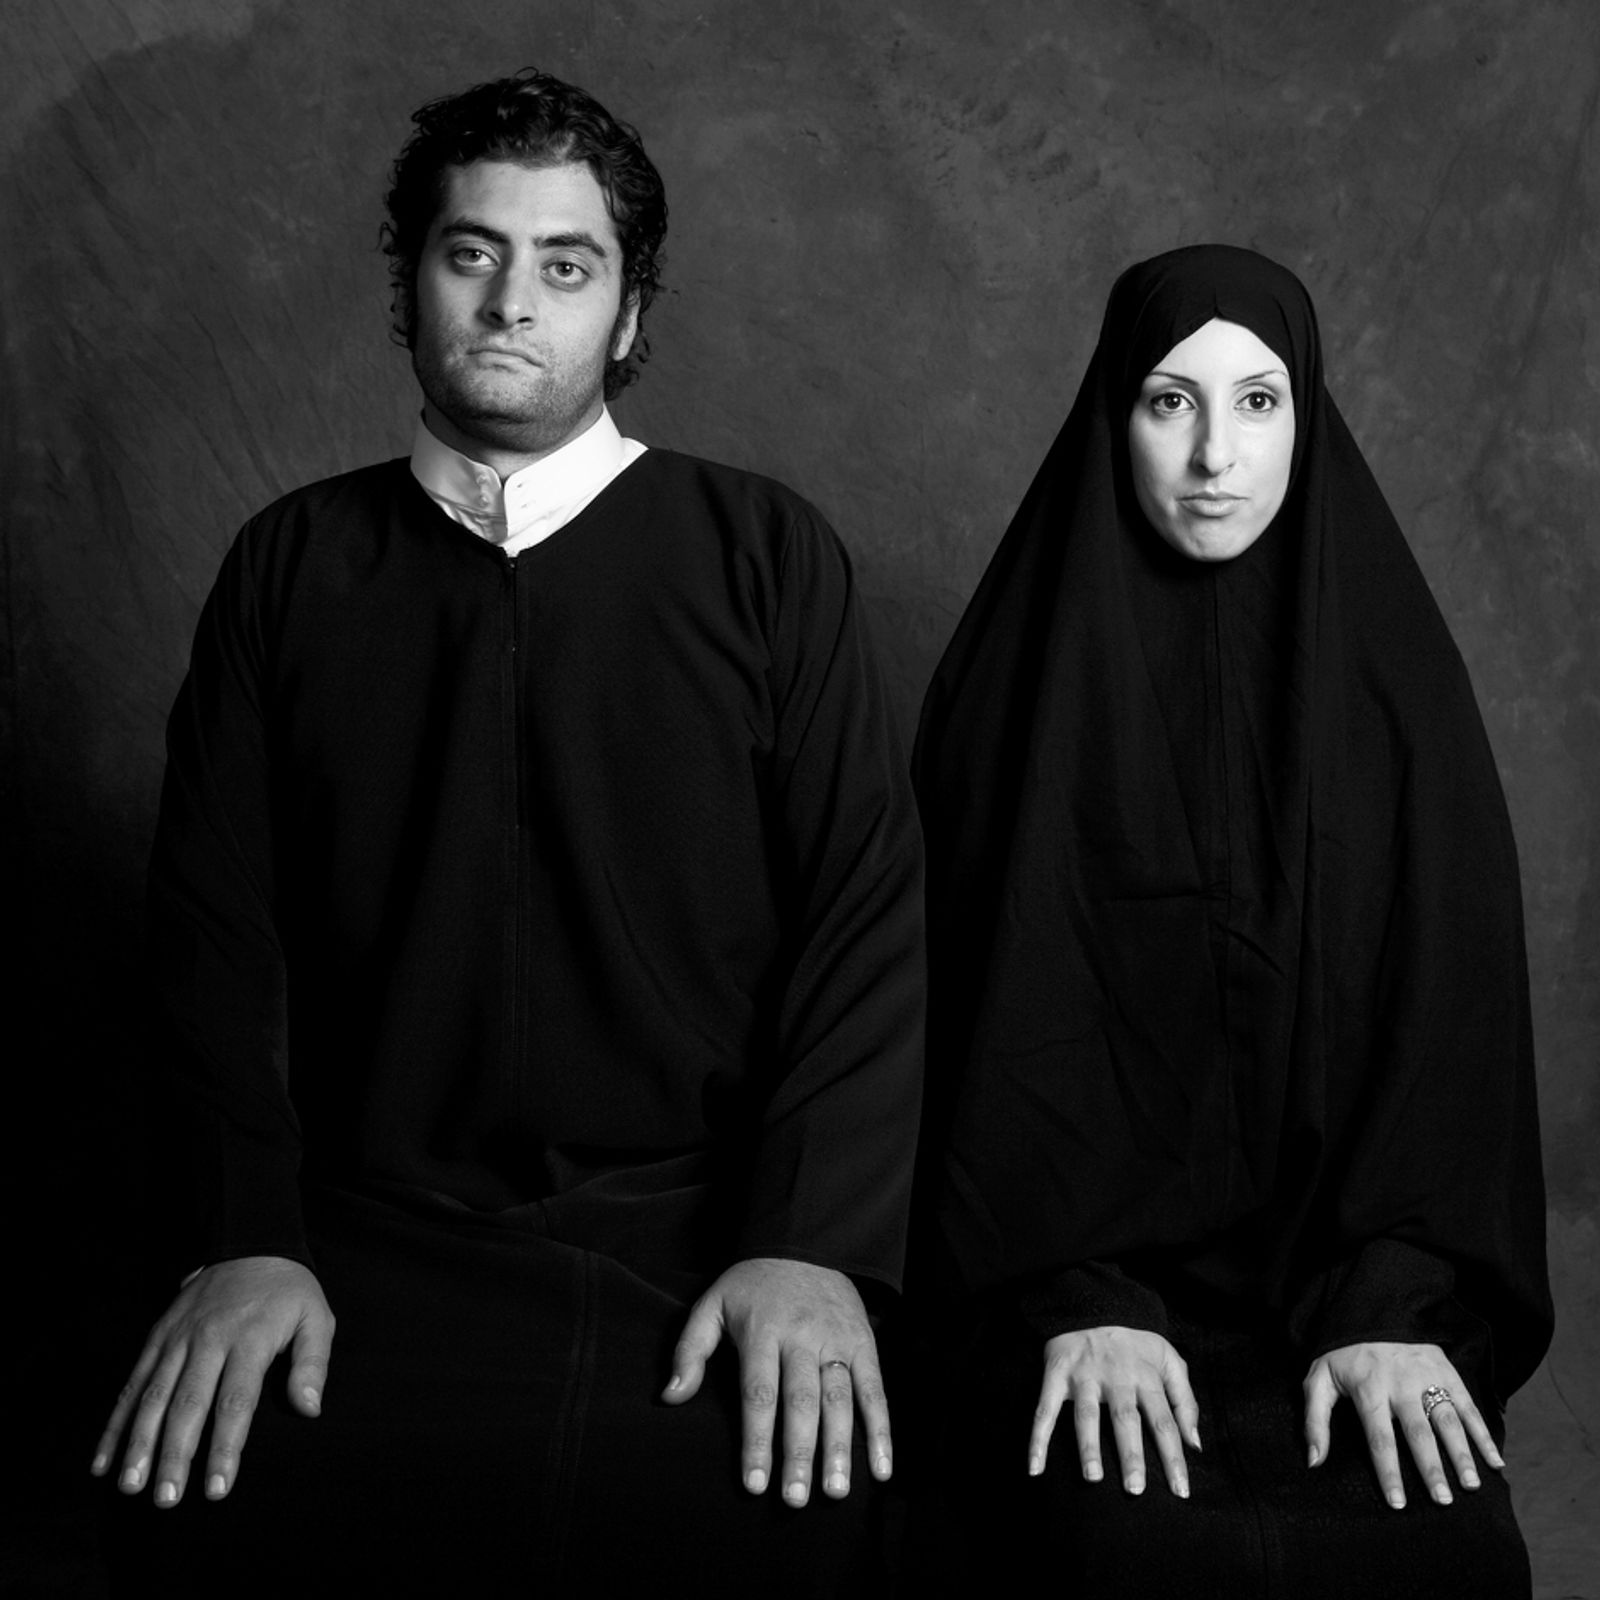 © Boushra Almutawakel - What If... comprised of 7 images, is the manifestation of my question, "What if the men were the ones who had to veil?"